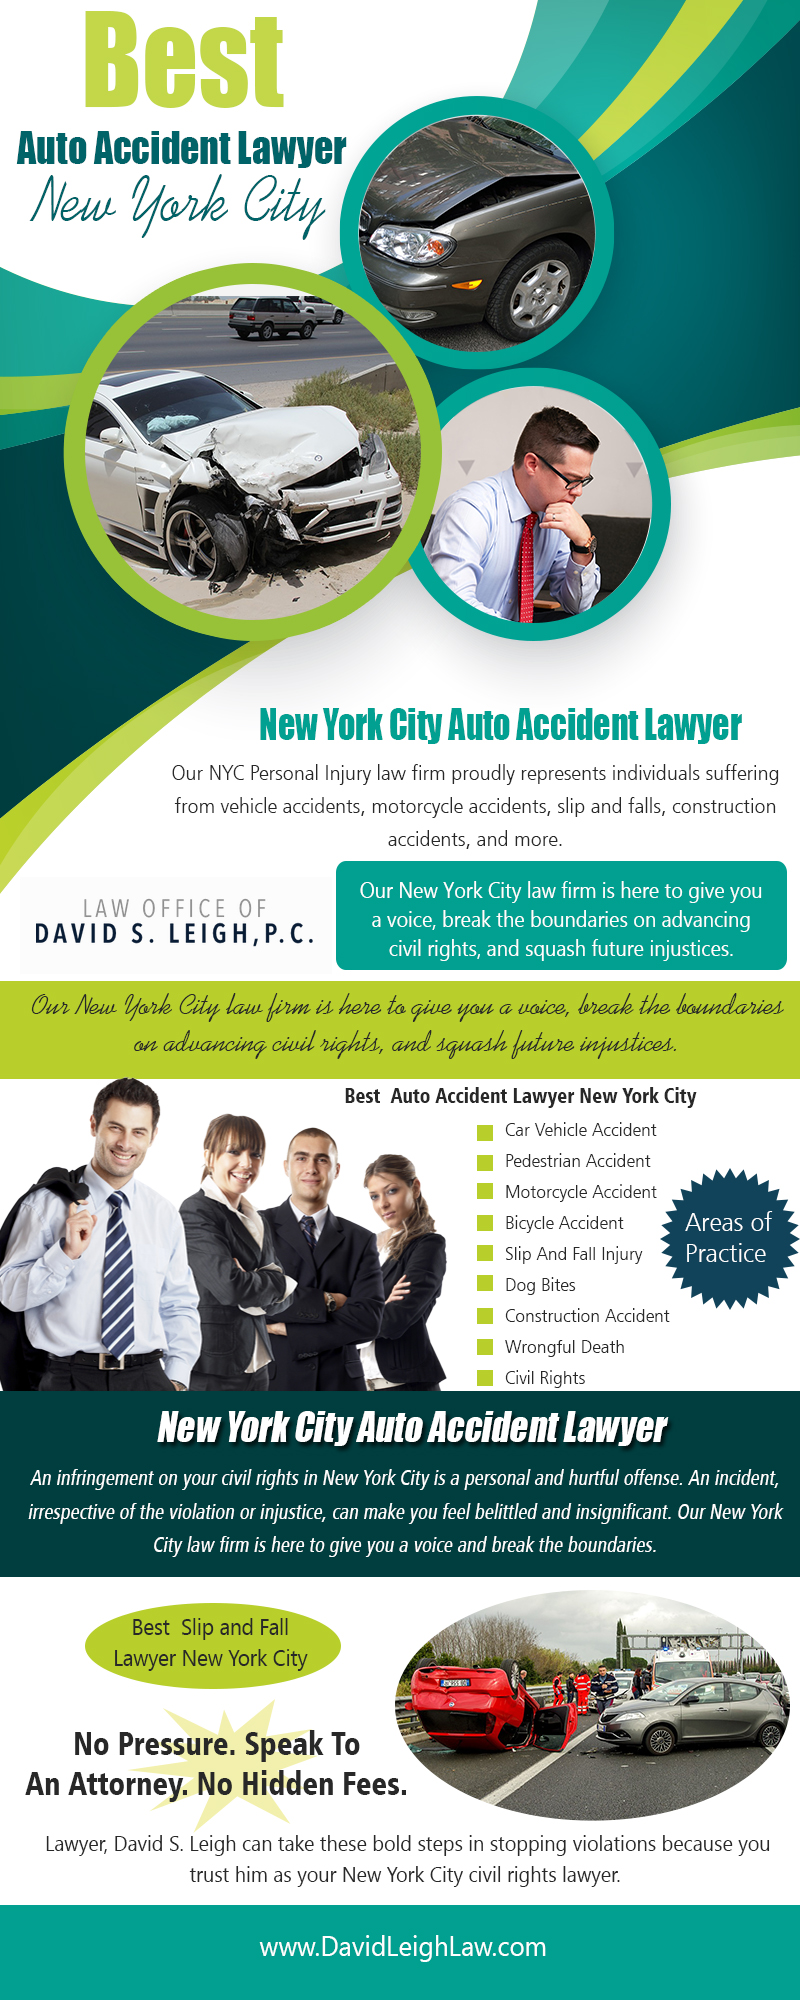 Best Auto Accident Lawyer New York City – New York City Personal Injury